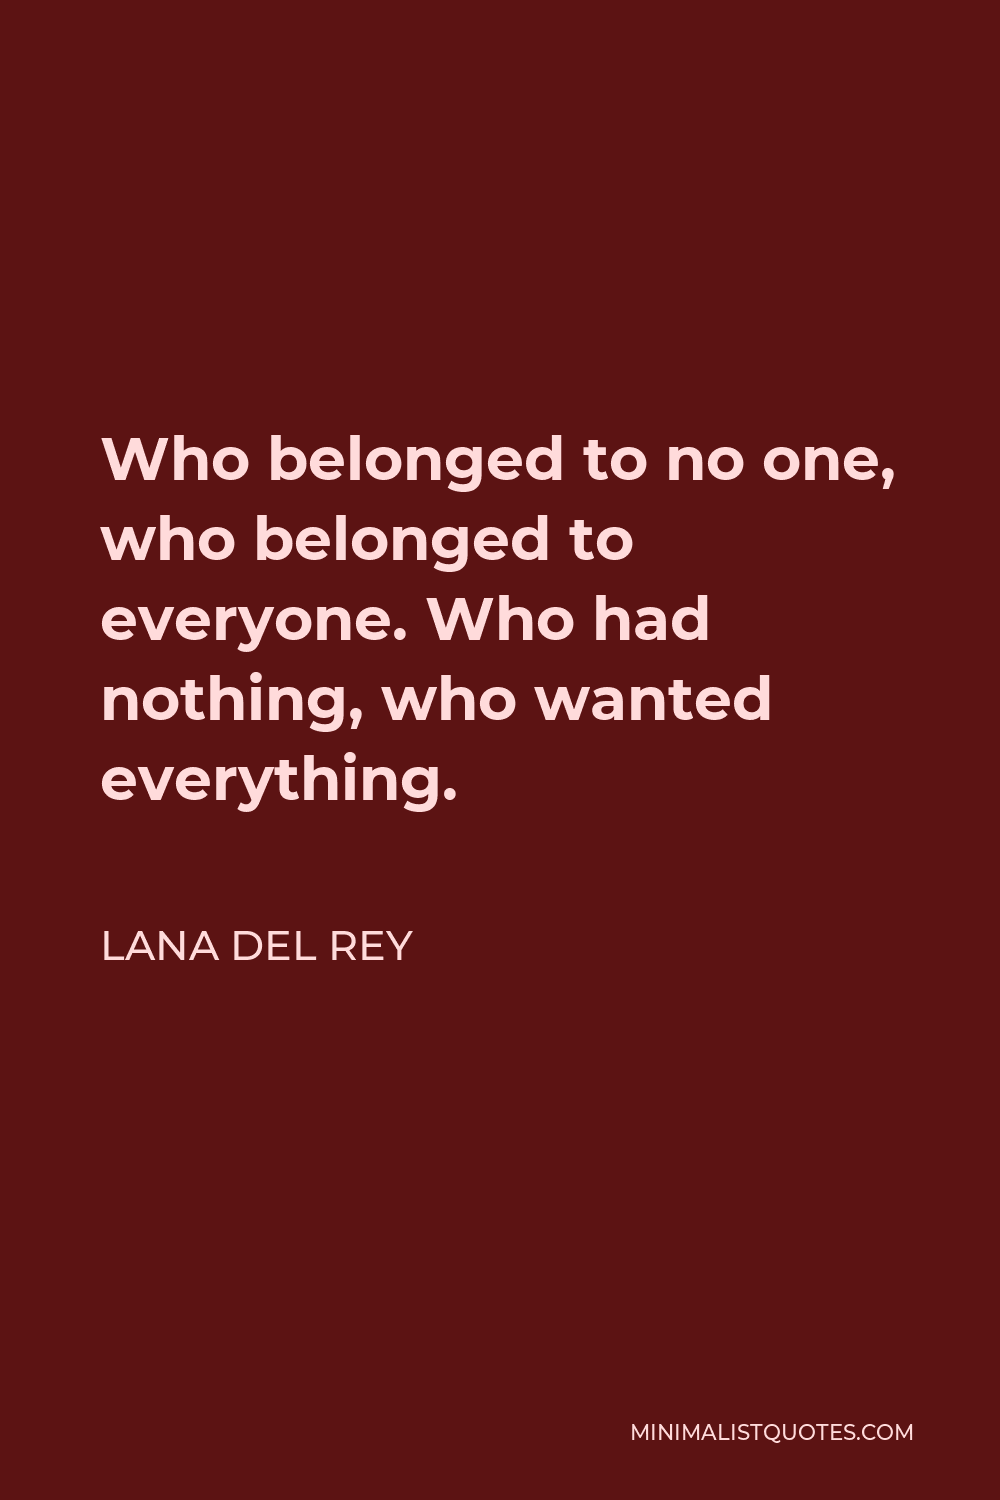 Lana Del Rey Quote - Who belonged to no one, who belonged to everyone. Who had nothing, who wanted everything.